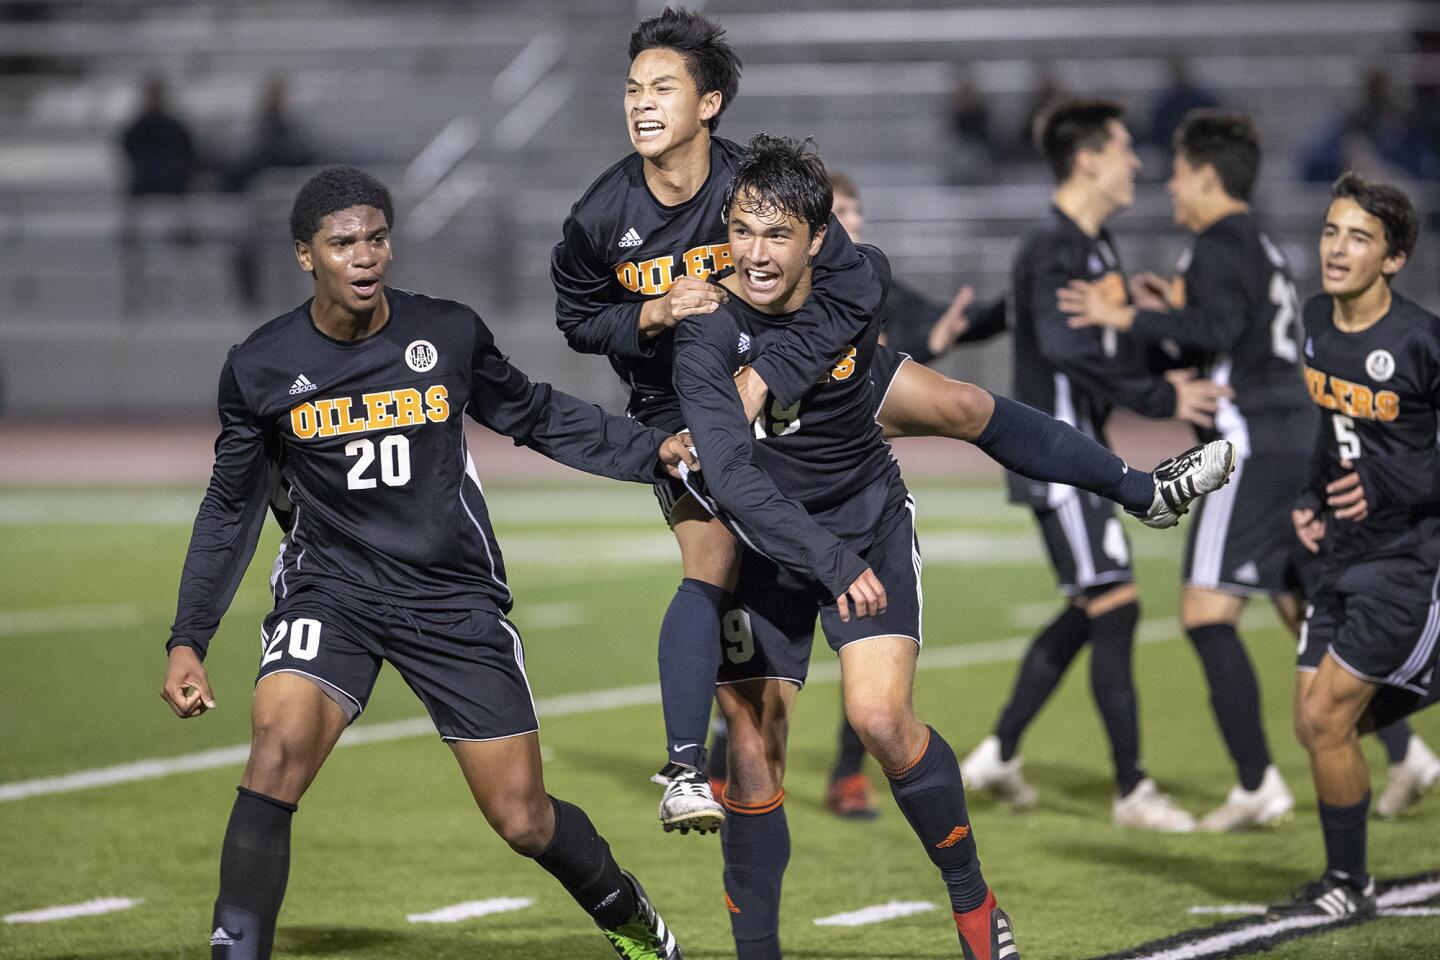 Huntington Beach High's Phillip Pham rides on the back of Brandon Francis after Francis scored the game-winning goal against Fountain Valley during a Wave League match at home Wednesday.